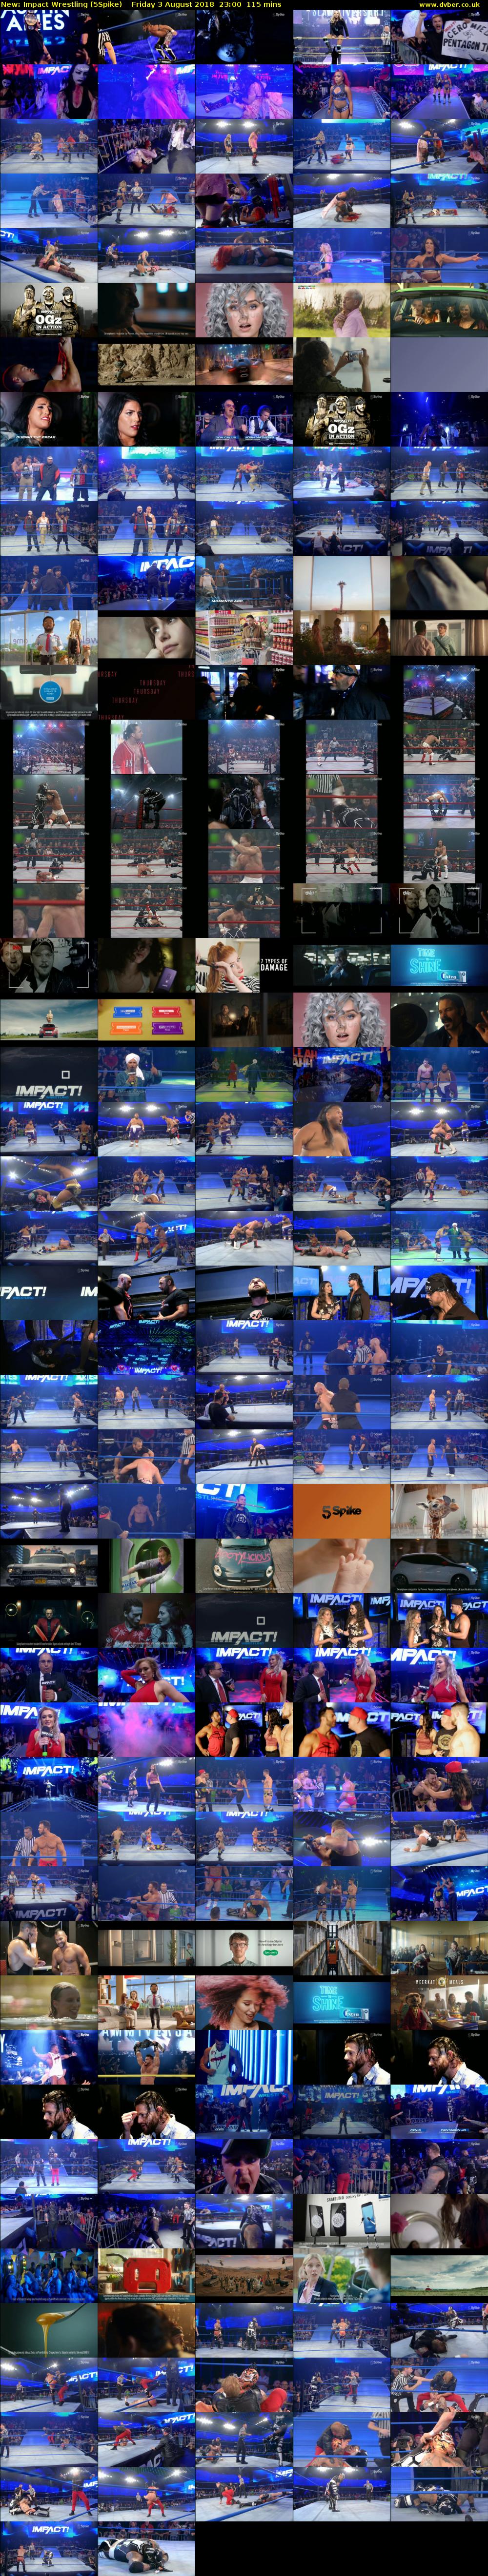 Impact Wrestling (5Spike) Friday 3 August 2018 23:00 - 00:55